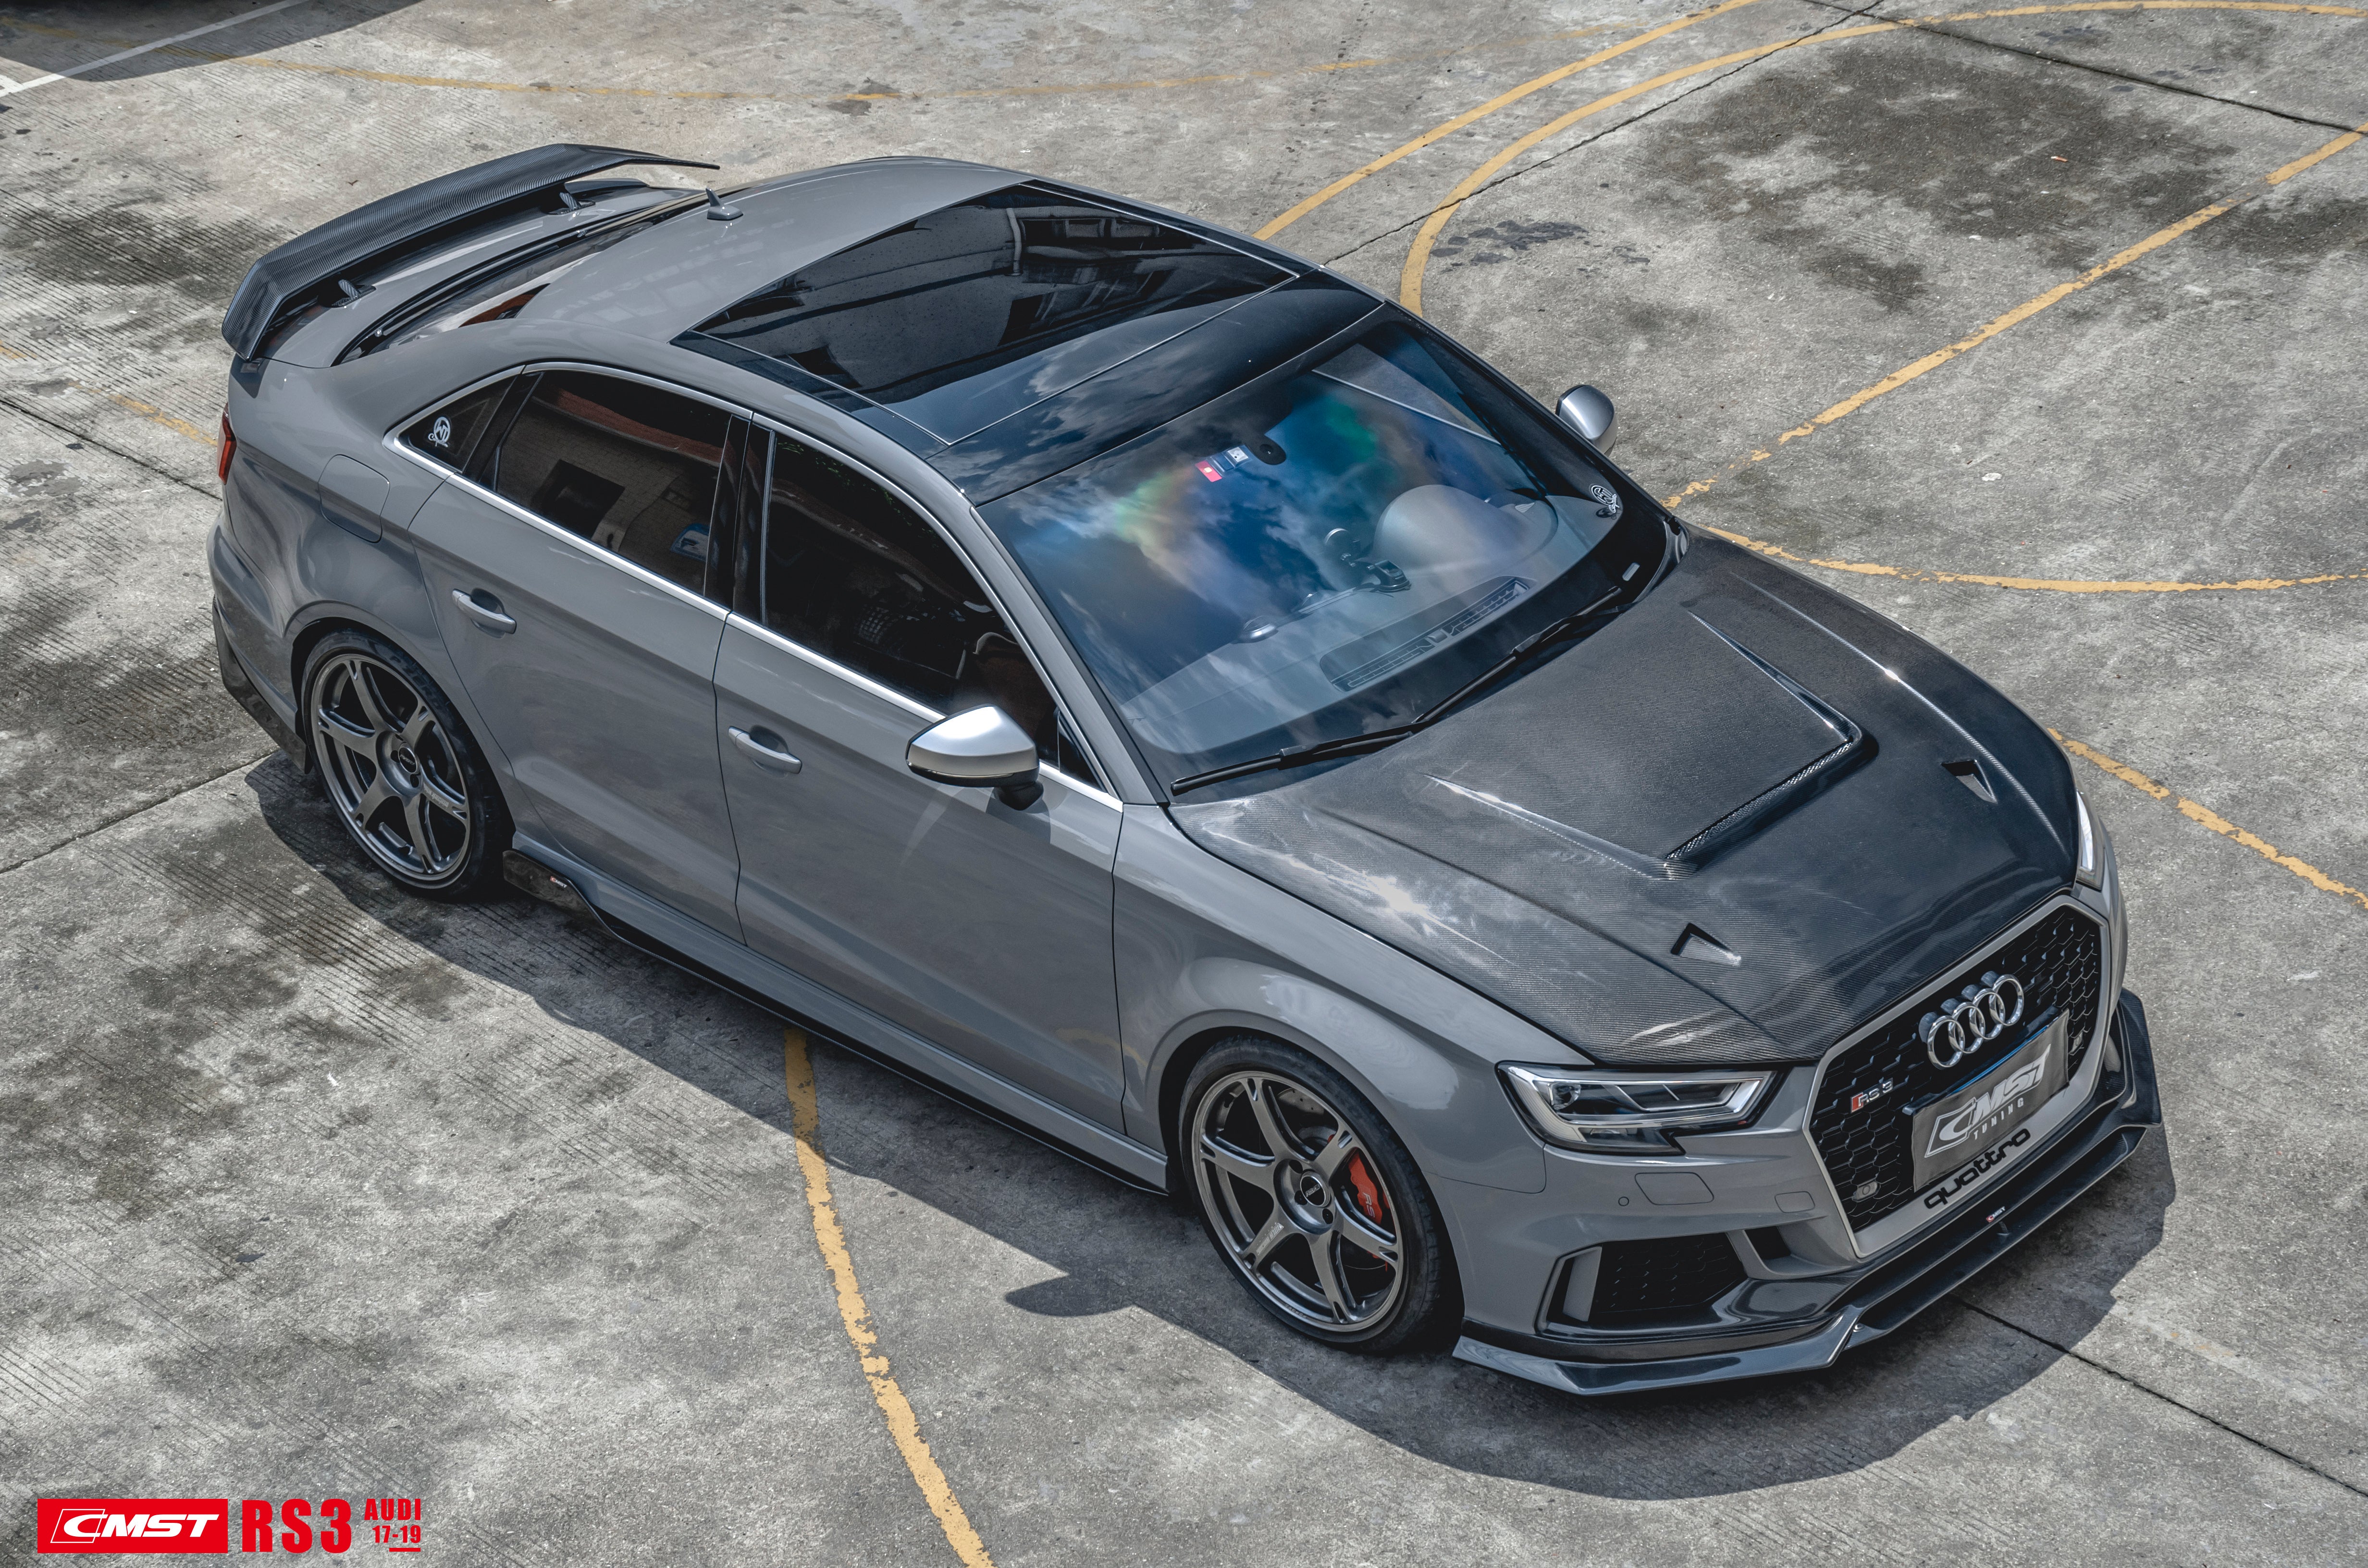 CMST Tuning Carbon Fiber Rear Spoiler Wing ver.3 for Audi RS3 2018-2020 & S3 & A3 S Line & A3 2014-2020